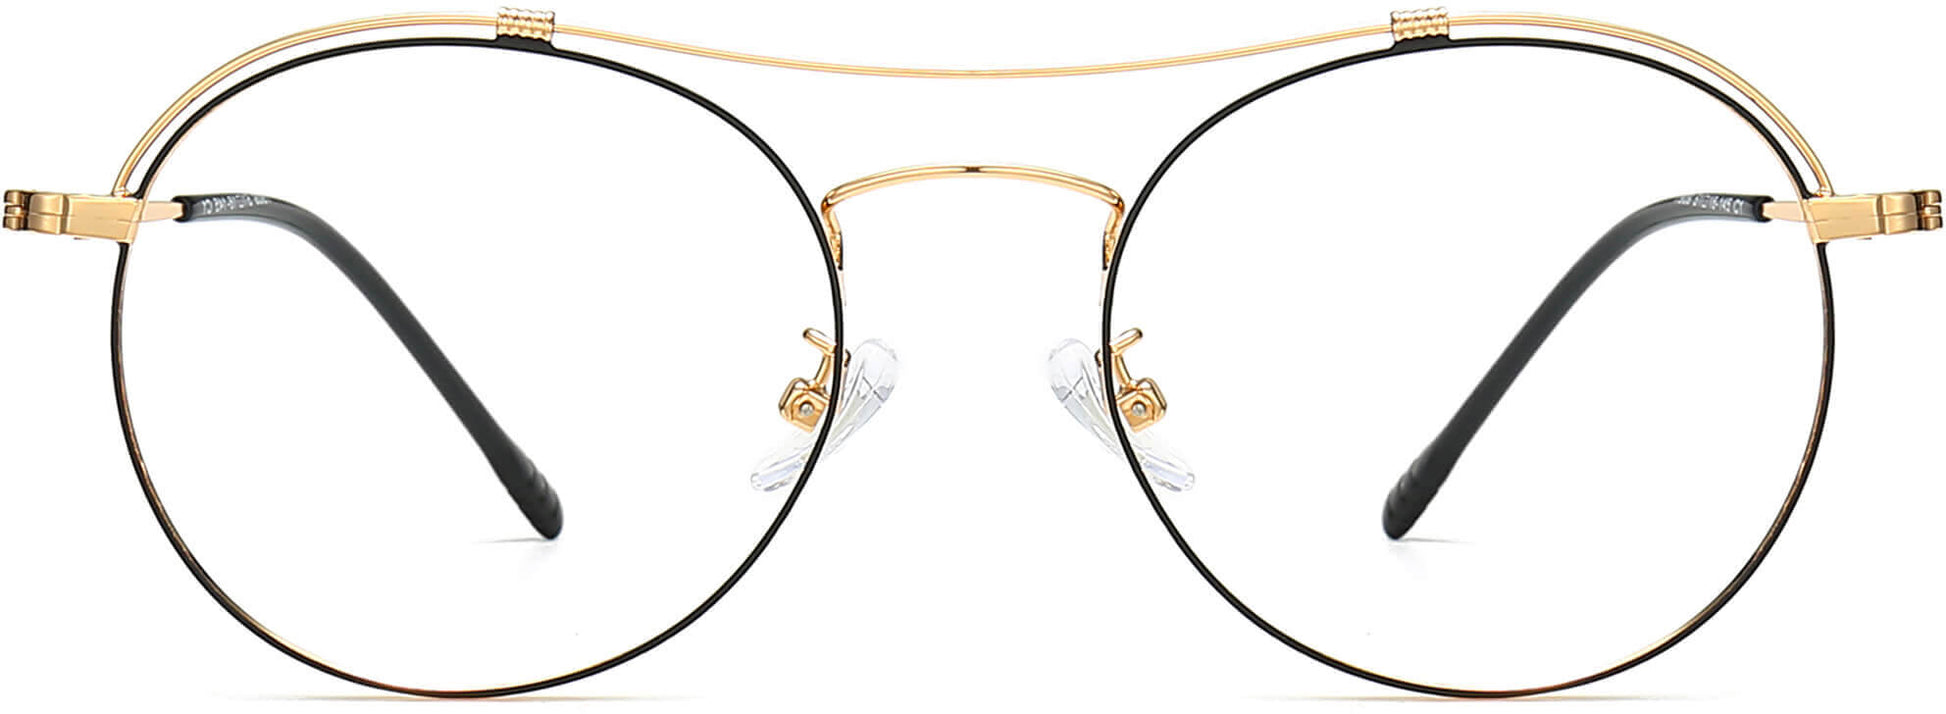 Colette Round Black Eyeglasses from ANRRI, front view